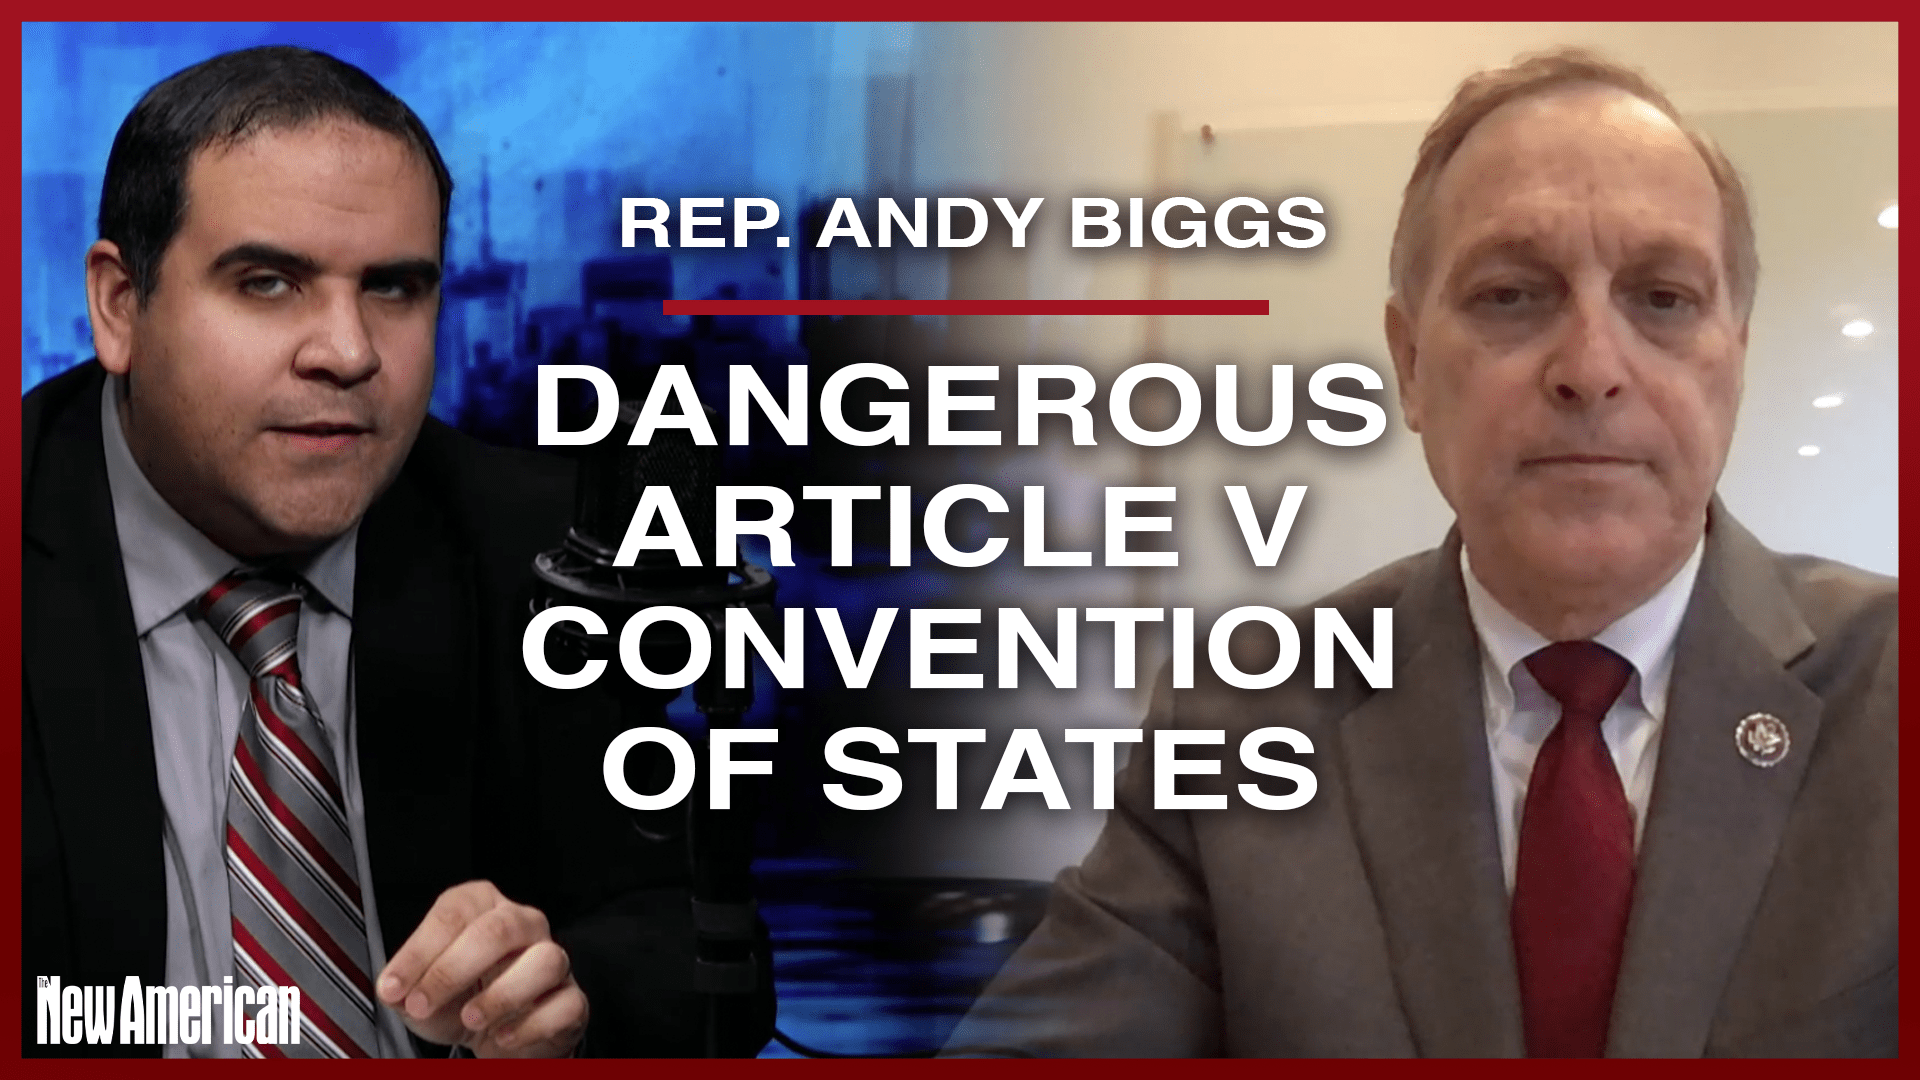 Congressman Biggs on Why an Article V Convention of States or Con-Con Would Be Dangerous   